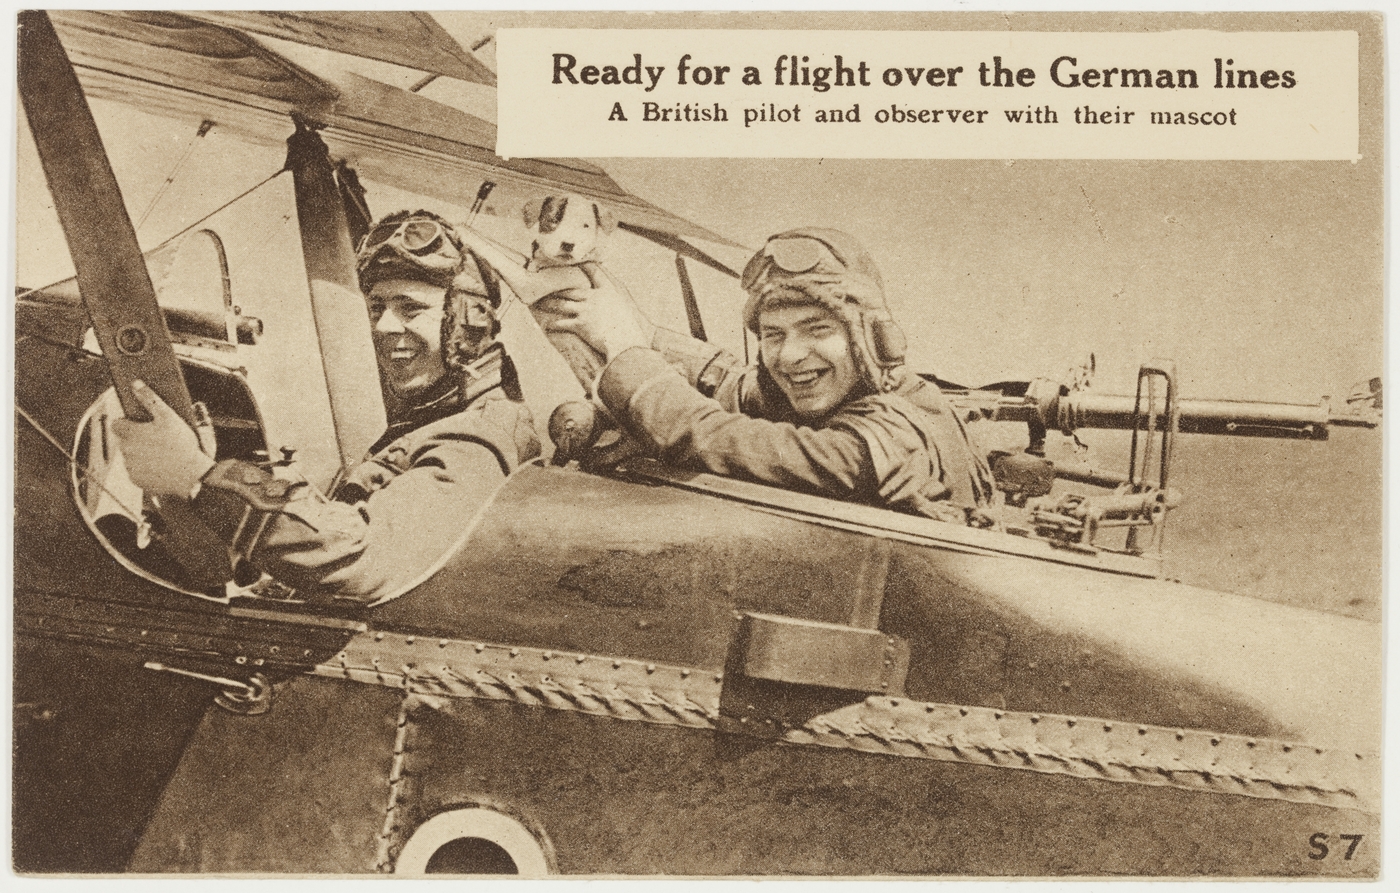 Ready for a flight over the German lines - a British pilot and observer with their mascot 